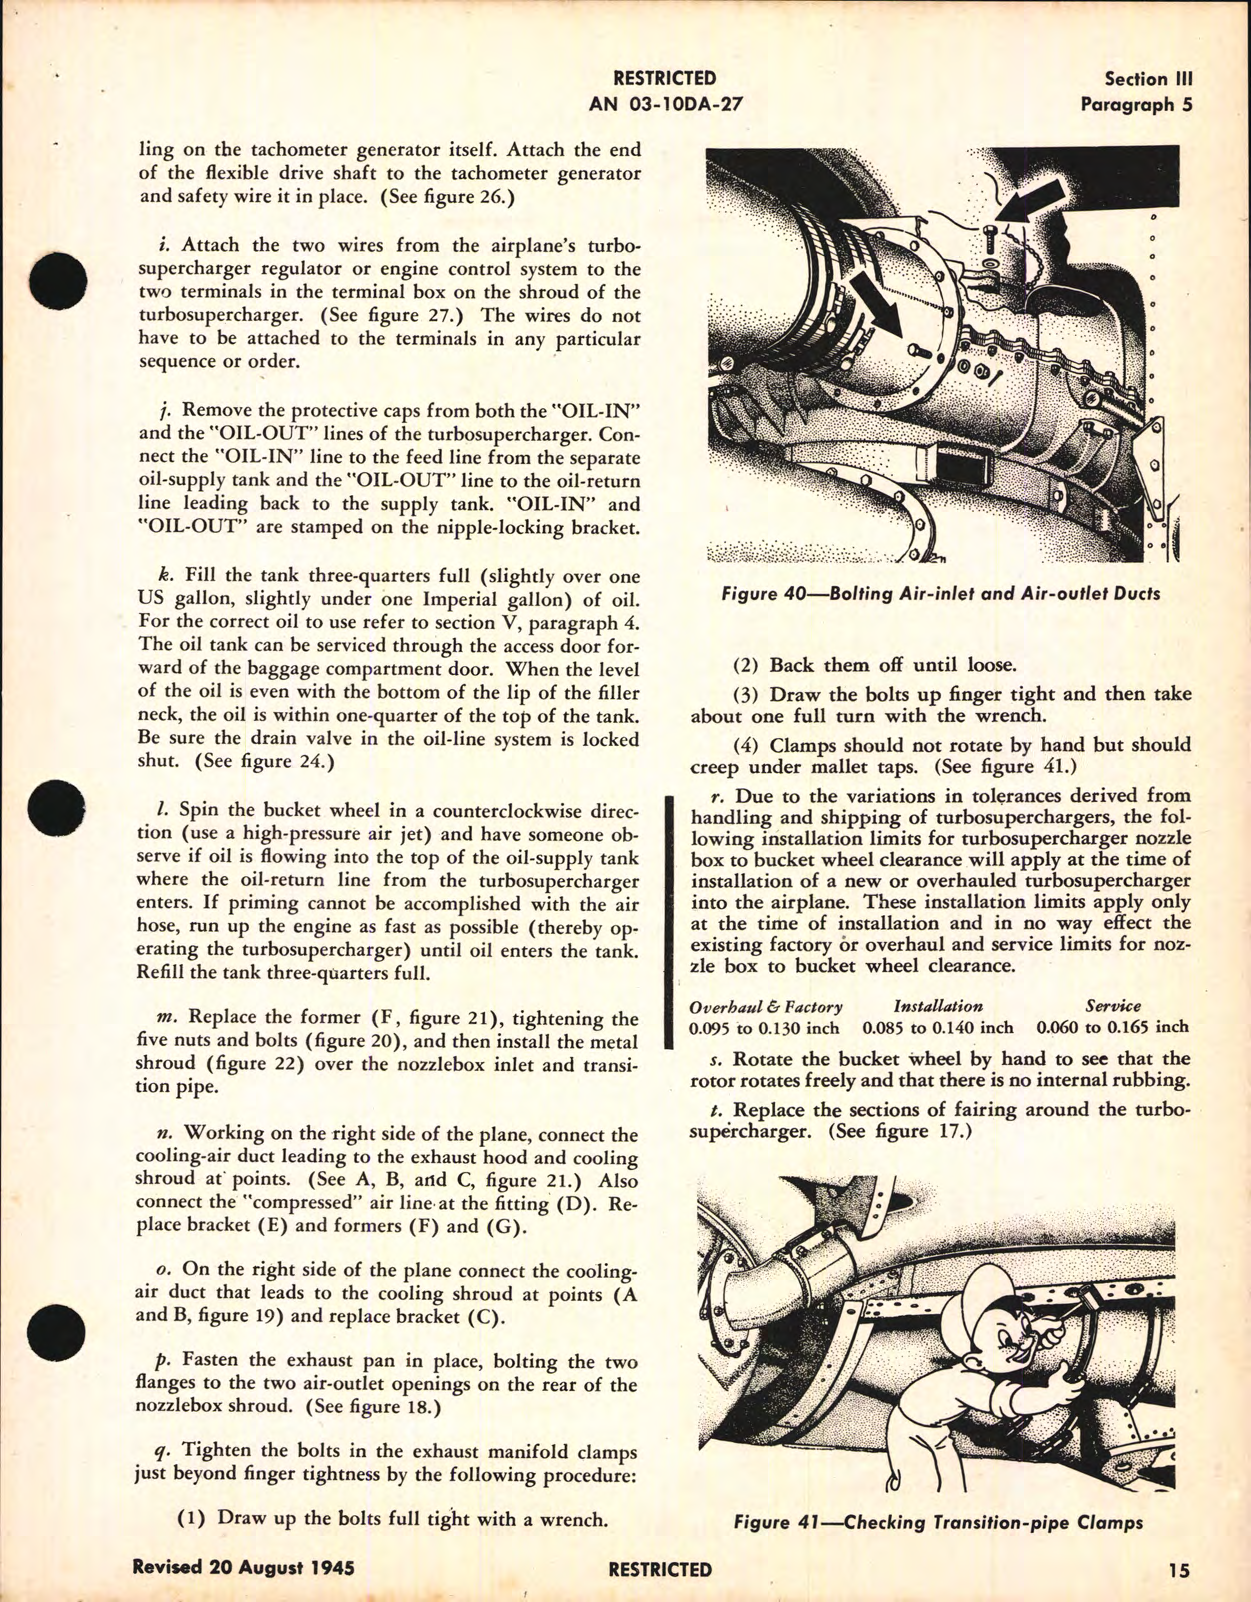 Sample page 5 from AirCorps Library document: Operation, Service, & Overhaul Instructions with Parts Catalog for Turbosuperchargers CH-5 Series